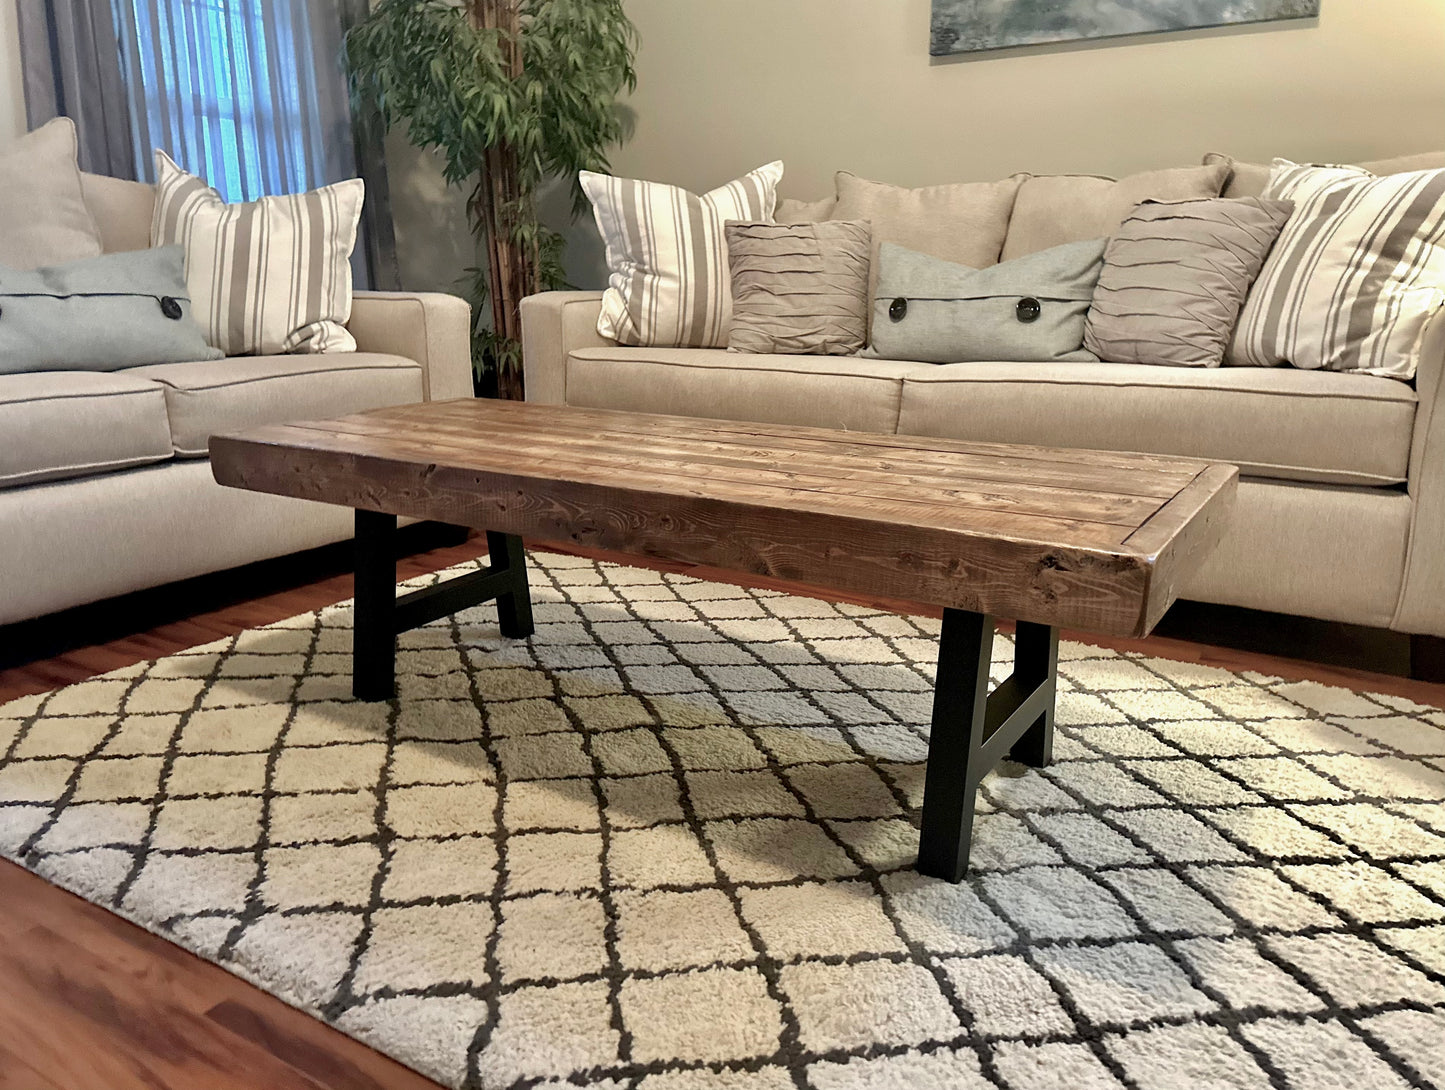 Steel and Pine Wood Weathered Coffee Table - Square Legs - Real Wood Furniture